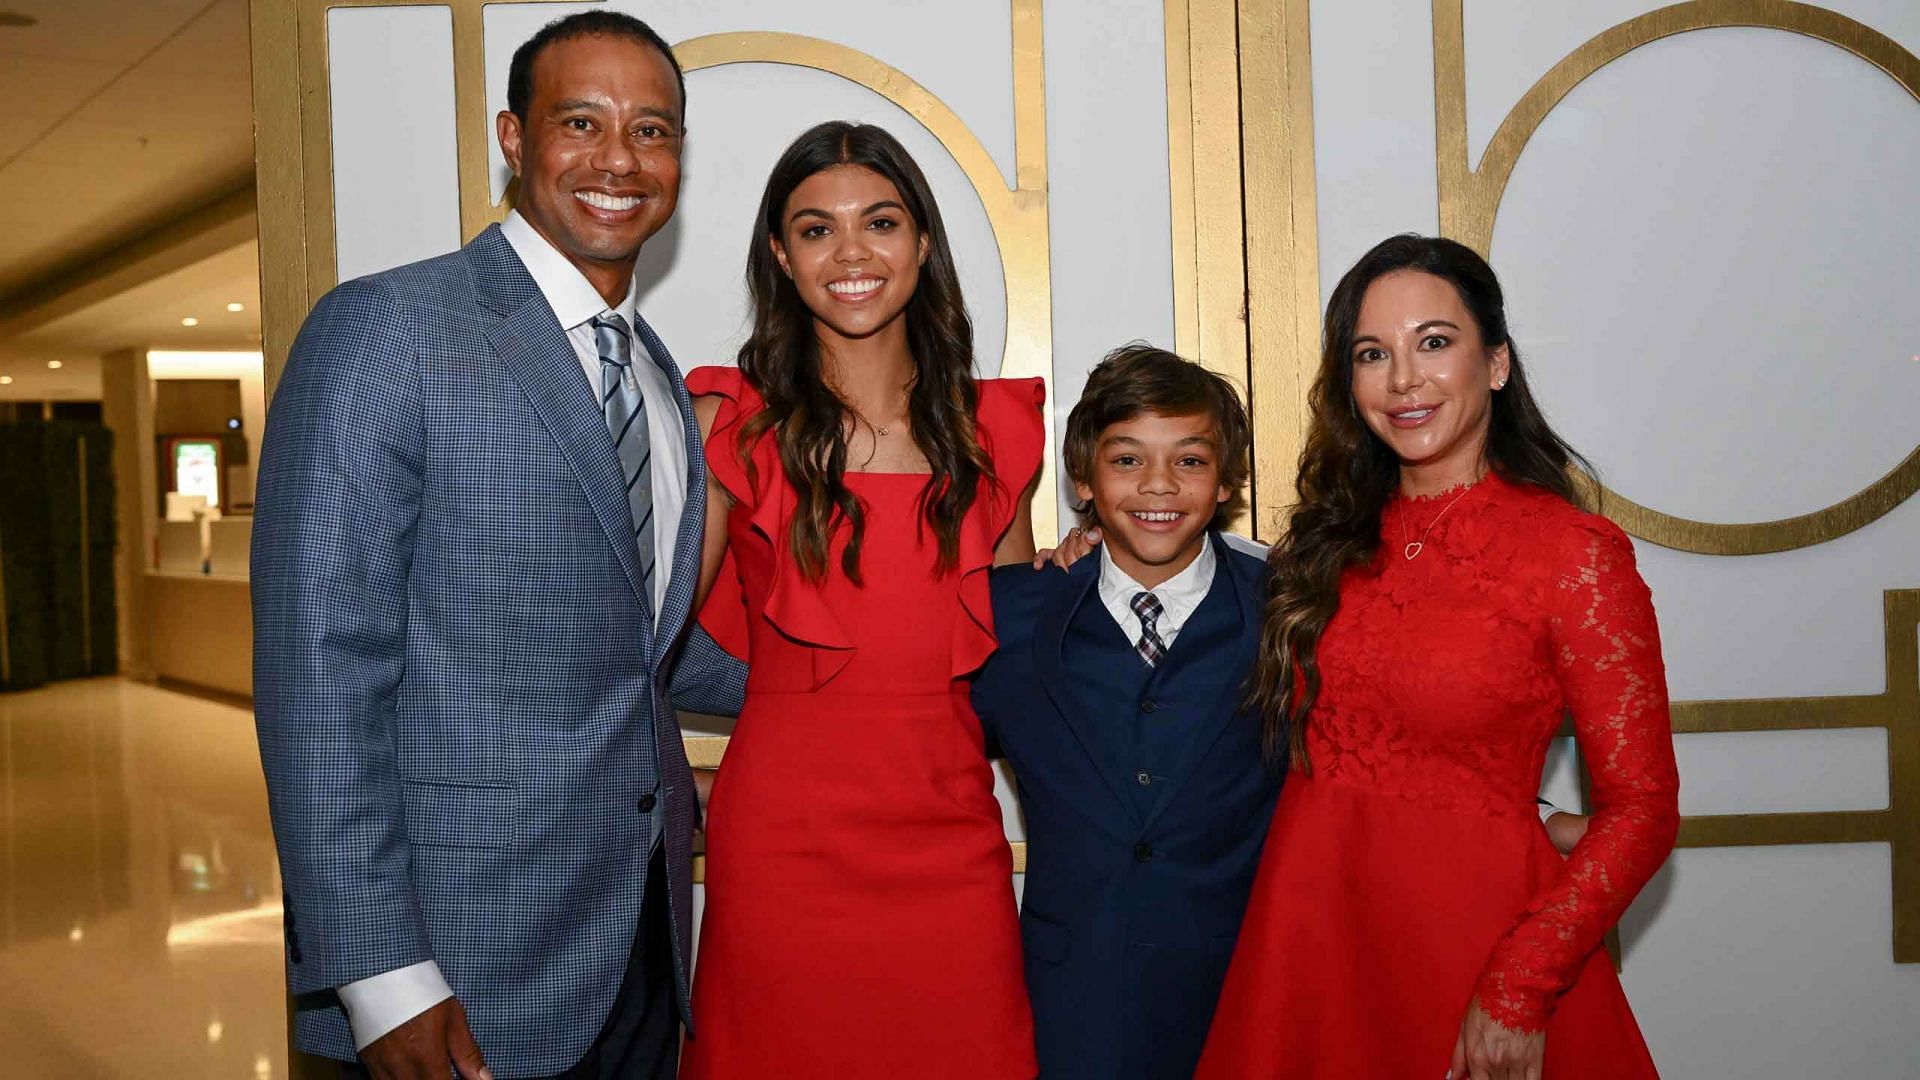 Tiger Woods with his family at the World Golf Hall of Fame in March 2022 (Image via Getty Images)